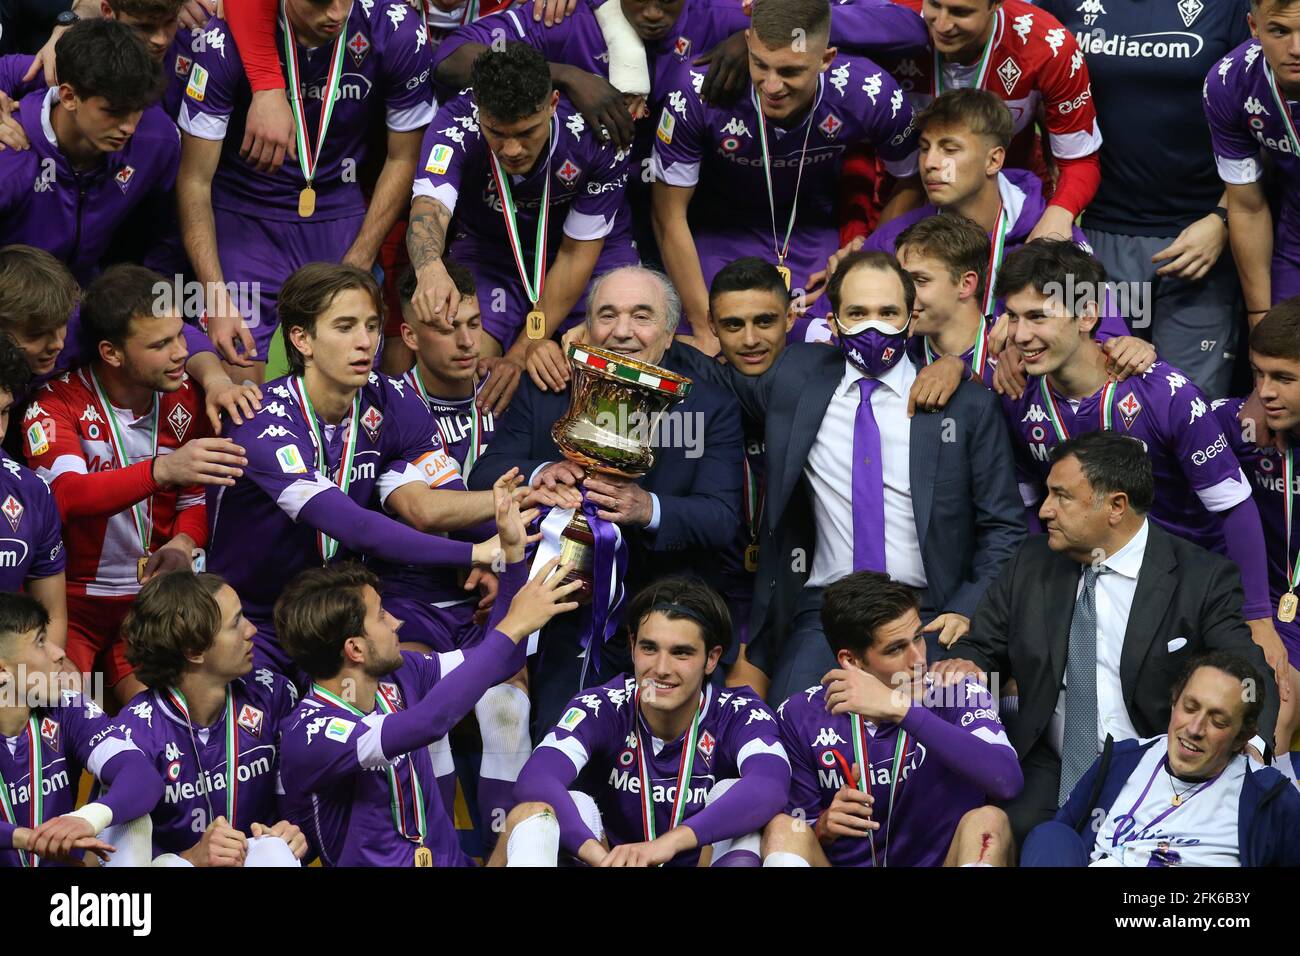 the players of Fiorentina Primavera celebrate victory of trophy News  Photo - Getty Images